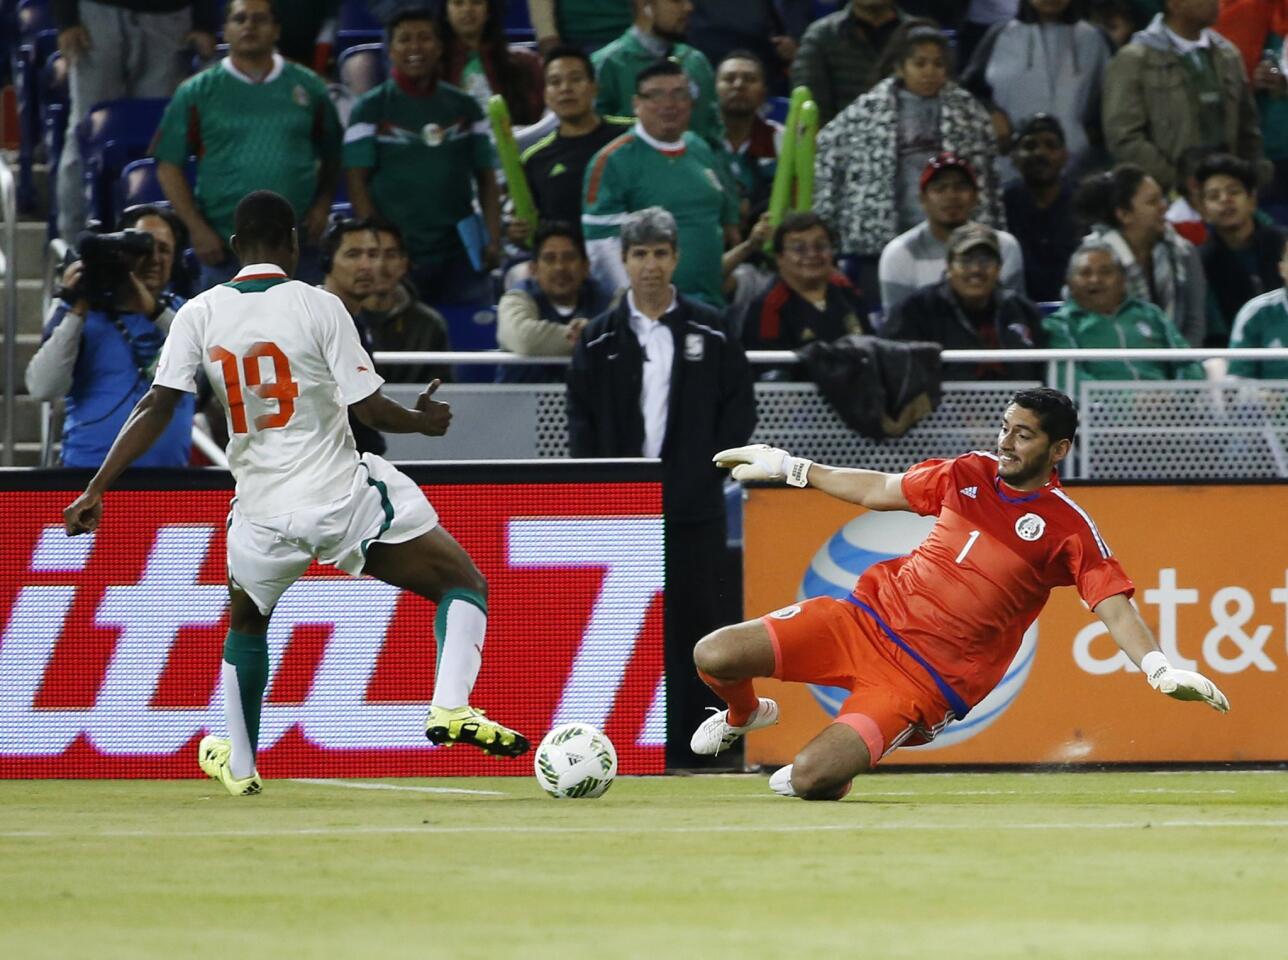 Mexico's goalkeeper Jesus Corona (1) makes a save against Senegal's Assane Mbodj during the first half of a soccer match at Marlins Park, Wednesday, Feb. 10, 2016, in Miami. (AP Photo/Wilfredo Lee)